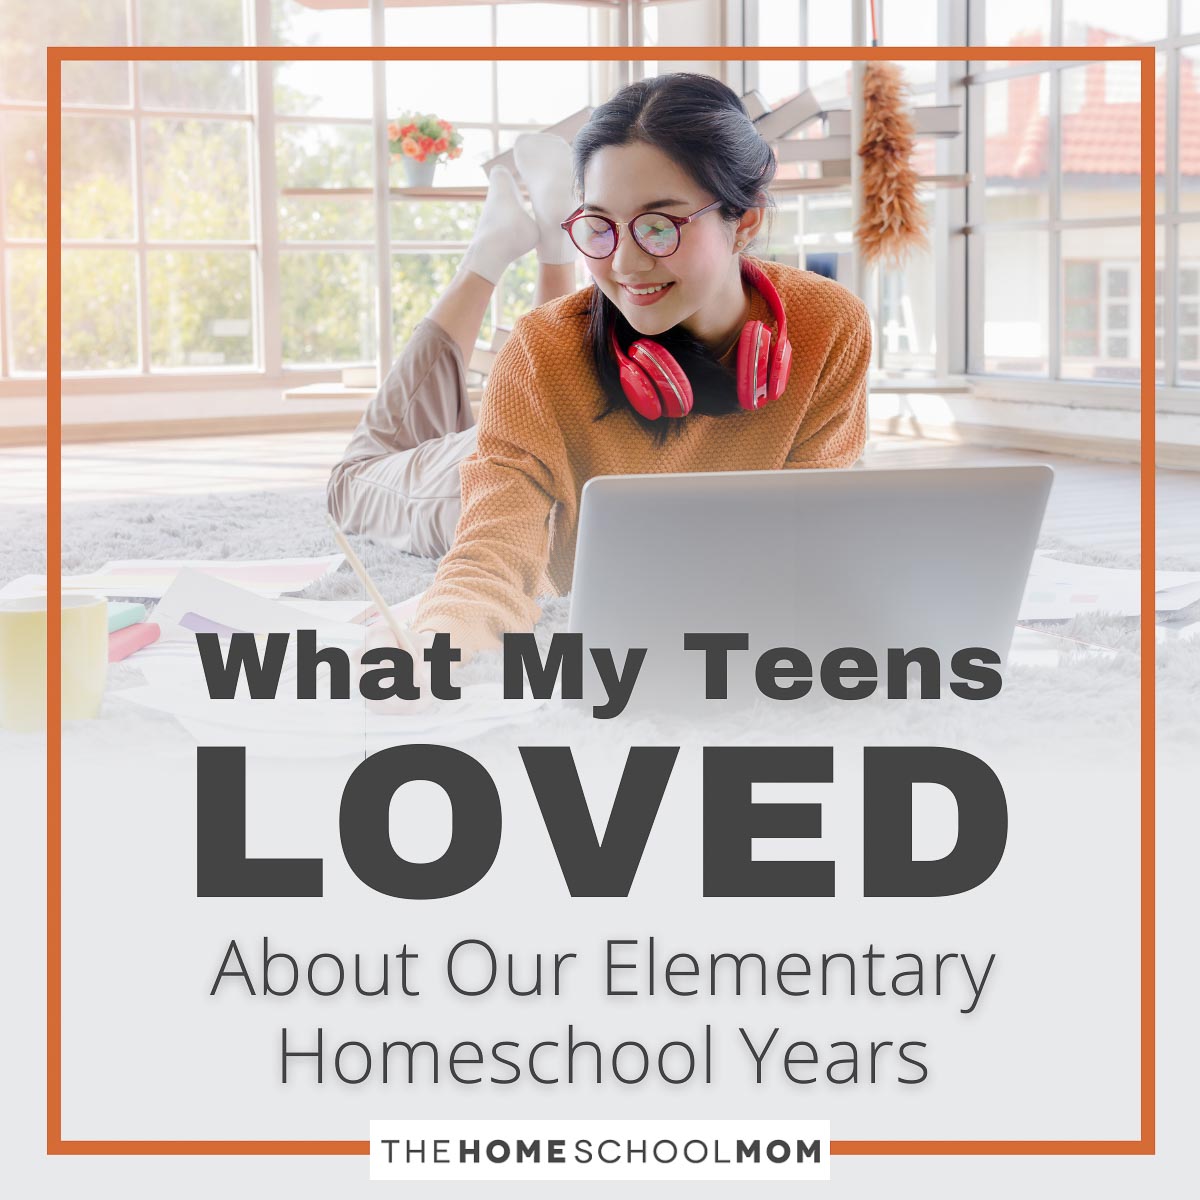 What My Teens Loved About Our Elementary Homeschool Years